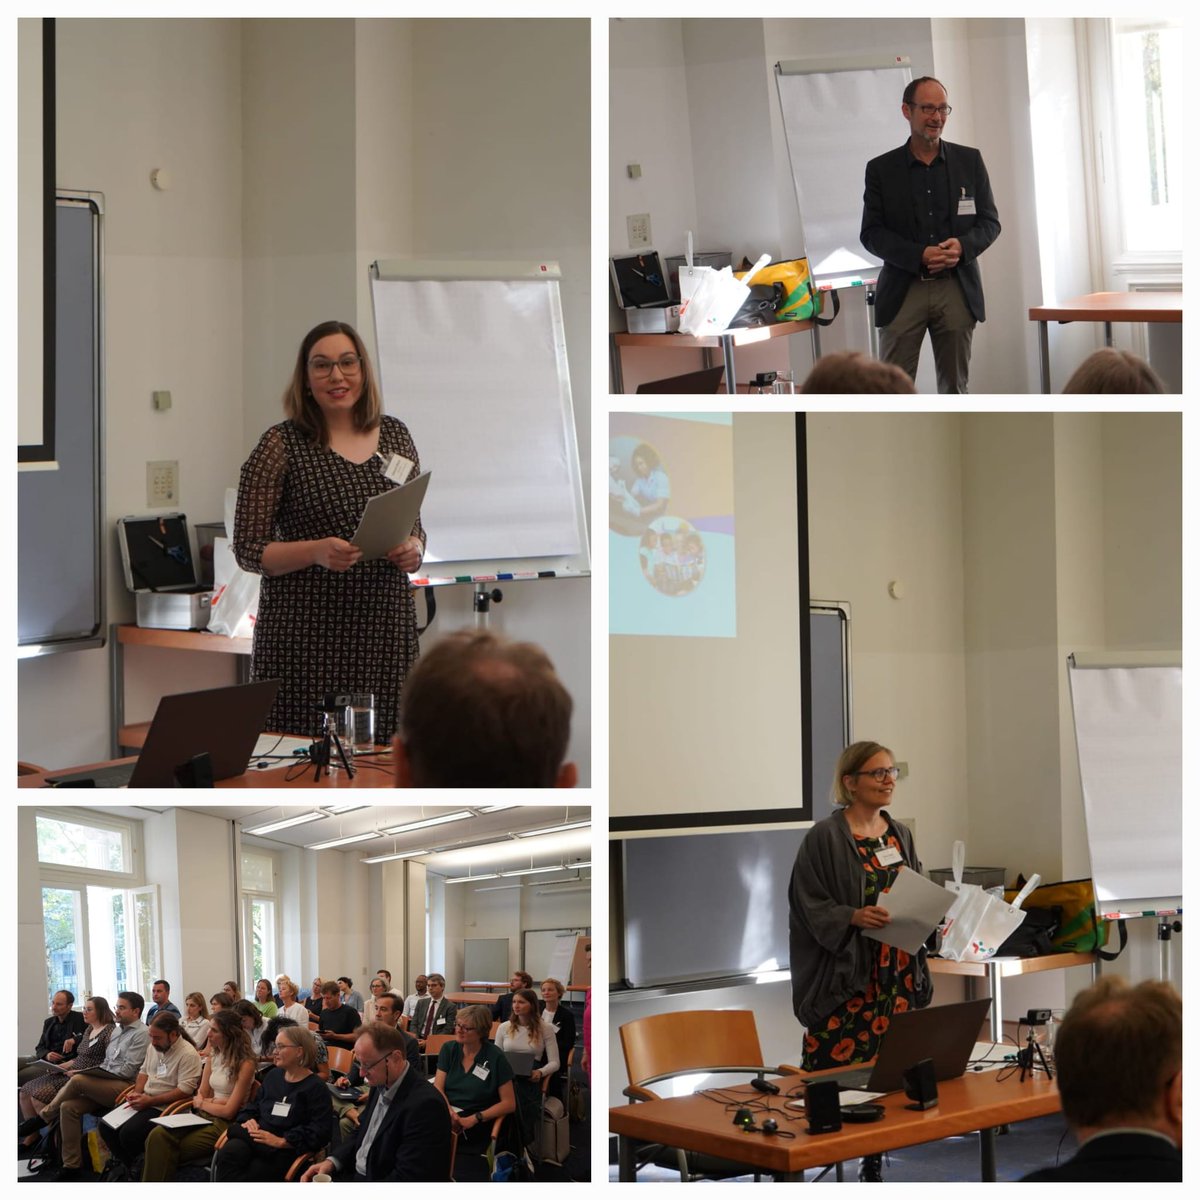 The #Incare final conference kicked off in Vienna today! Susanna Ulinski, @EU_Commission opened the conference. Kai Leichsenring, Executive Director of the @EuroCentre_SWPR welcomed the participants & Selma Kadi, project co-ordinator presented the #InCARE project & its results.